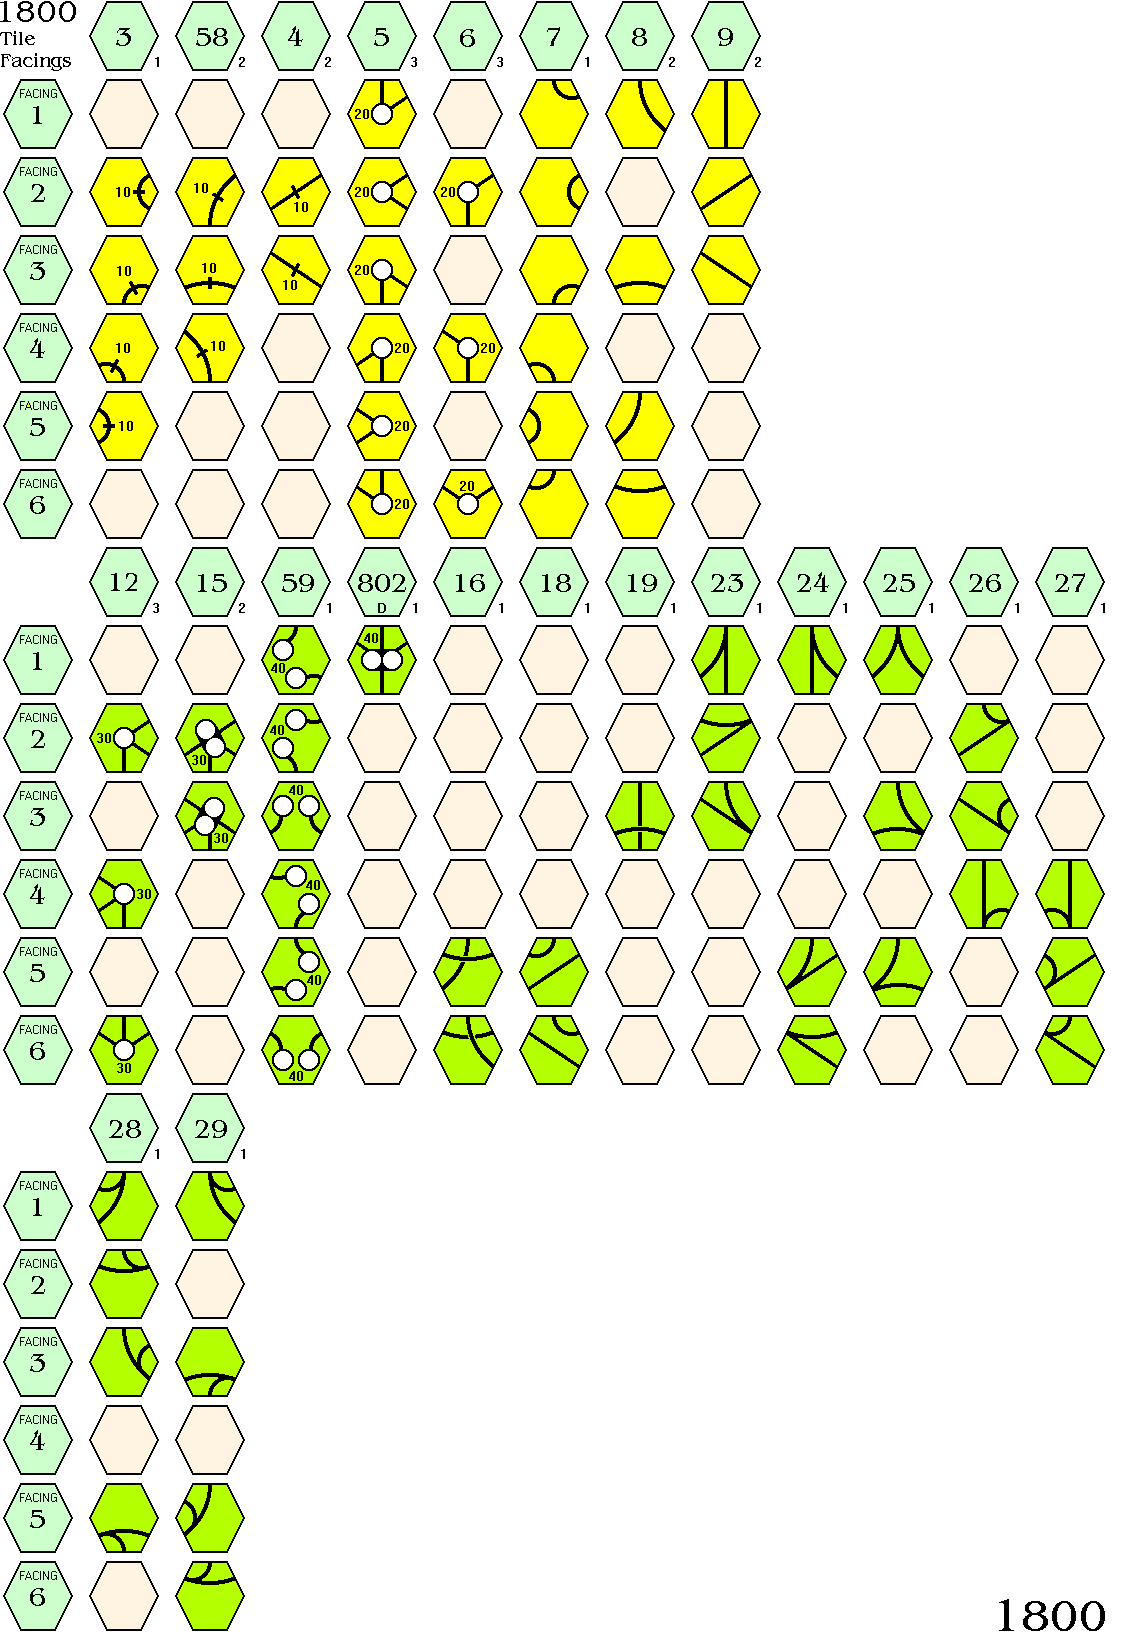 1800 (3 players) tile sheet - 1 of 2 - click to view the tile sheet on its own